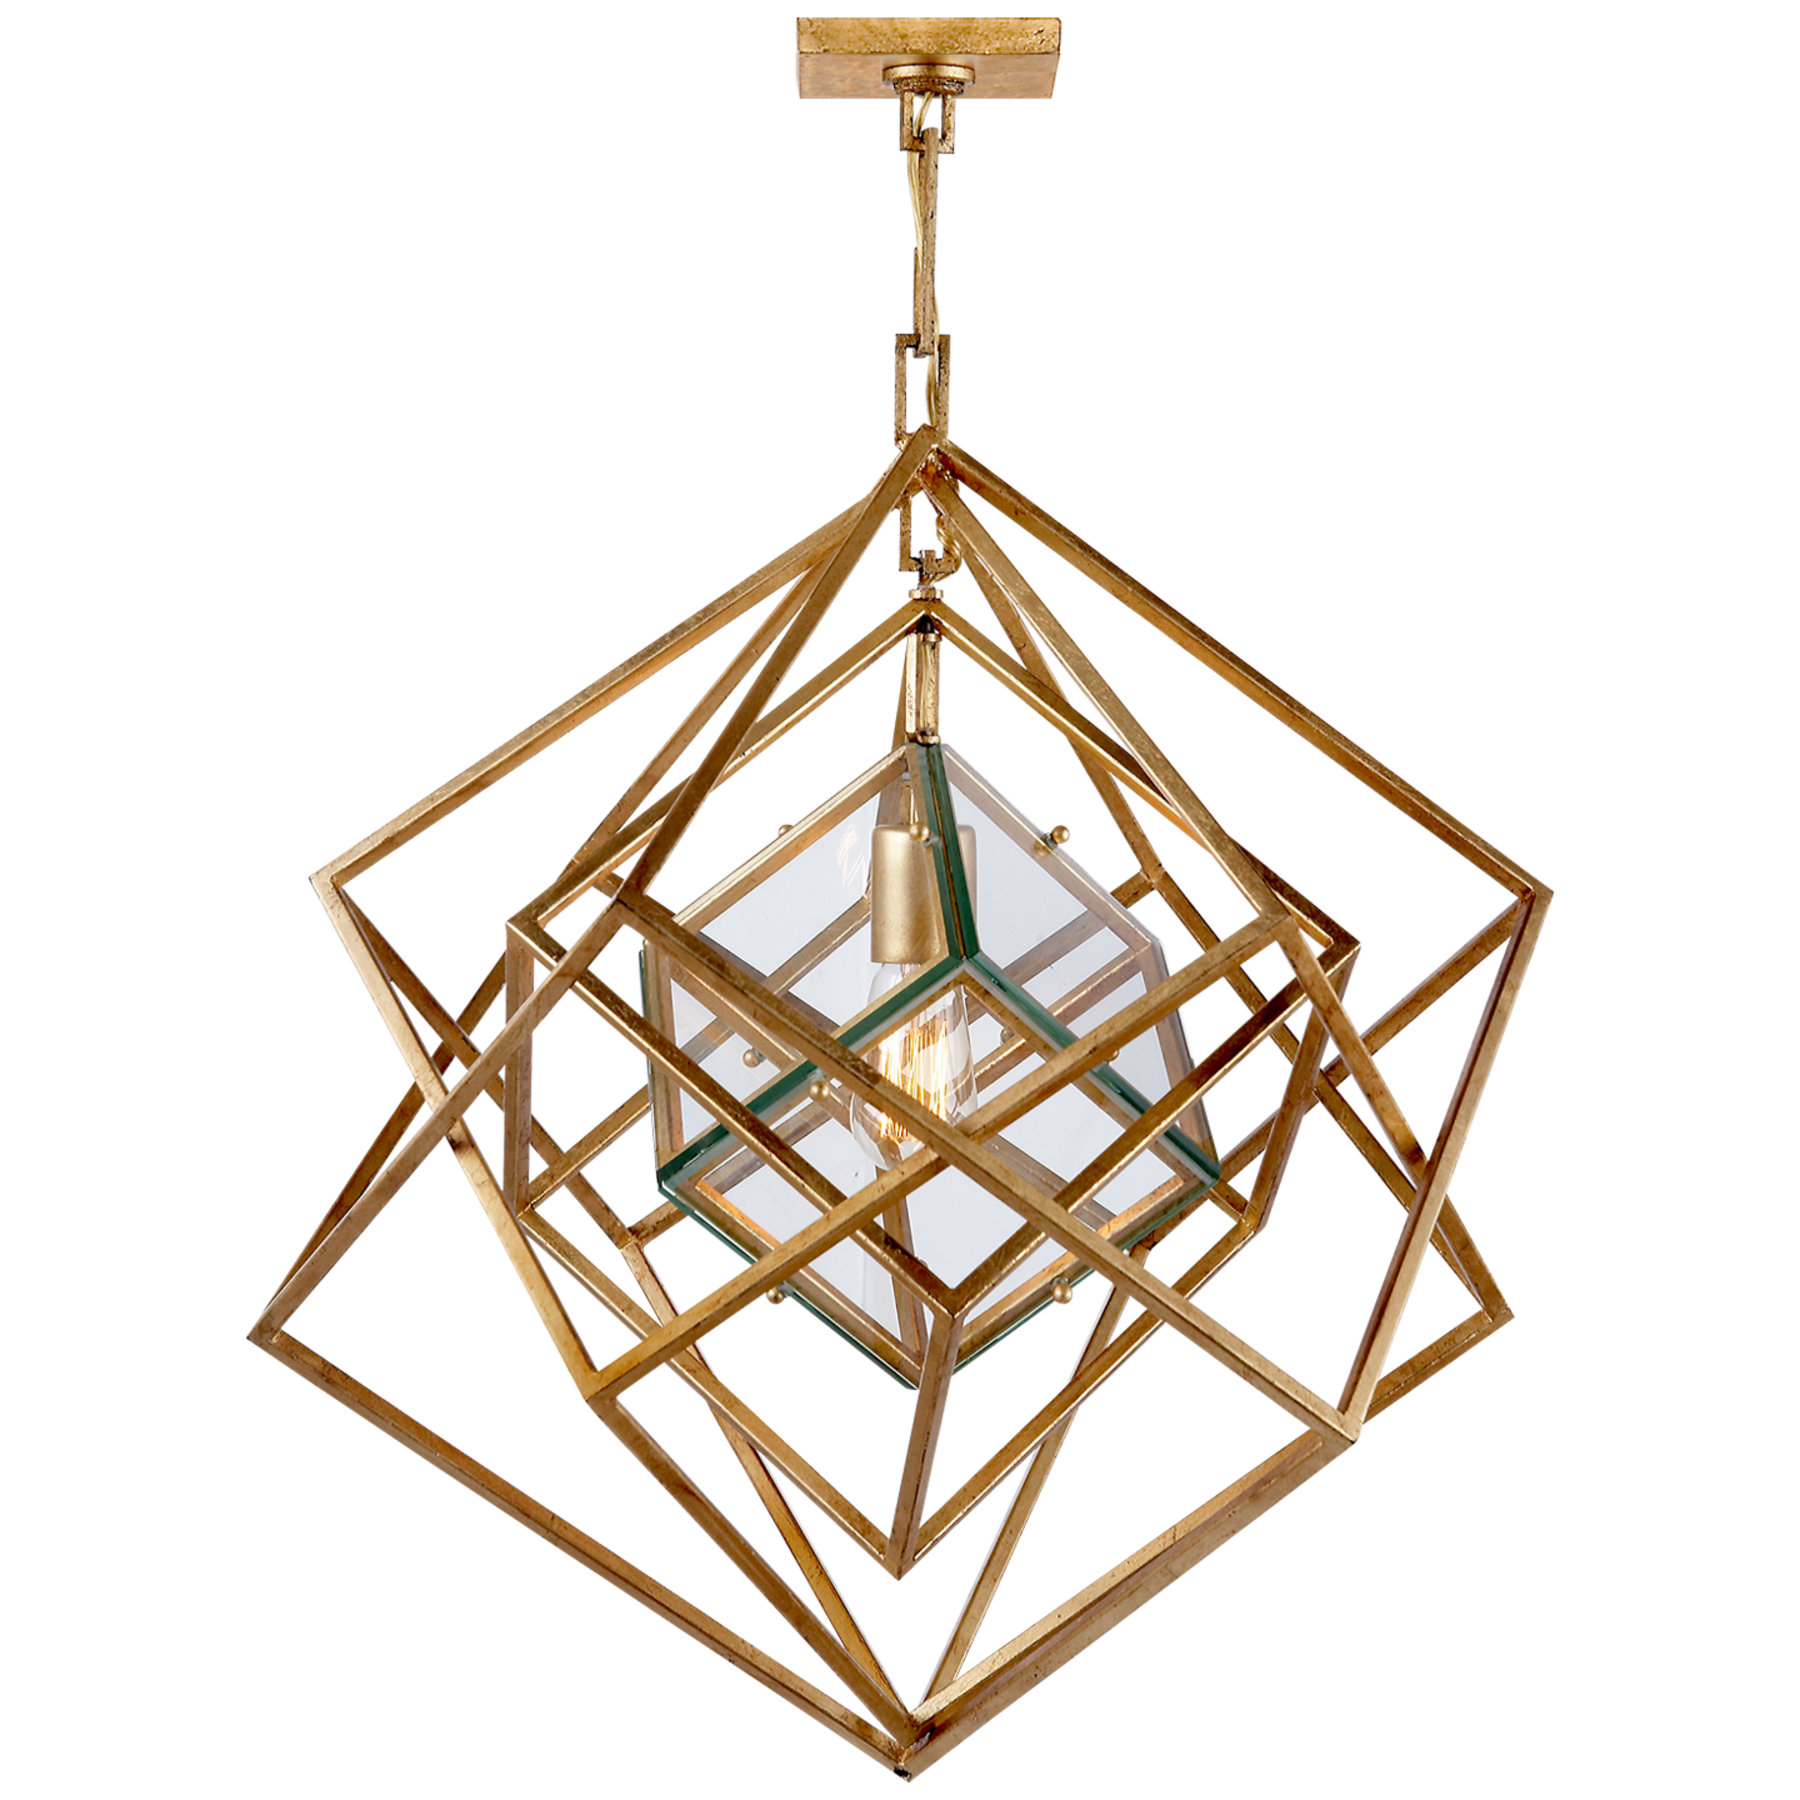 Visual Comfort Cubist Small Chandelier